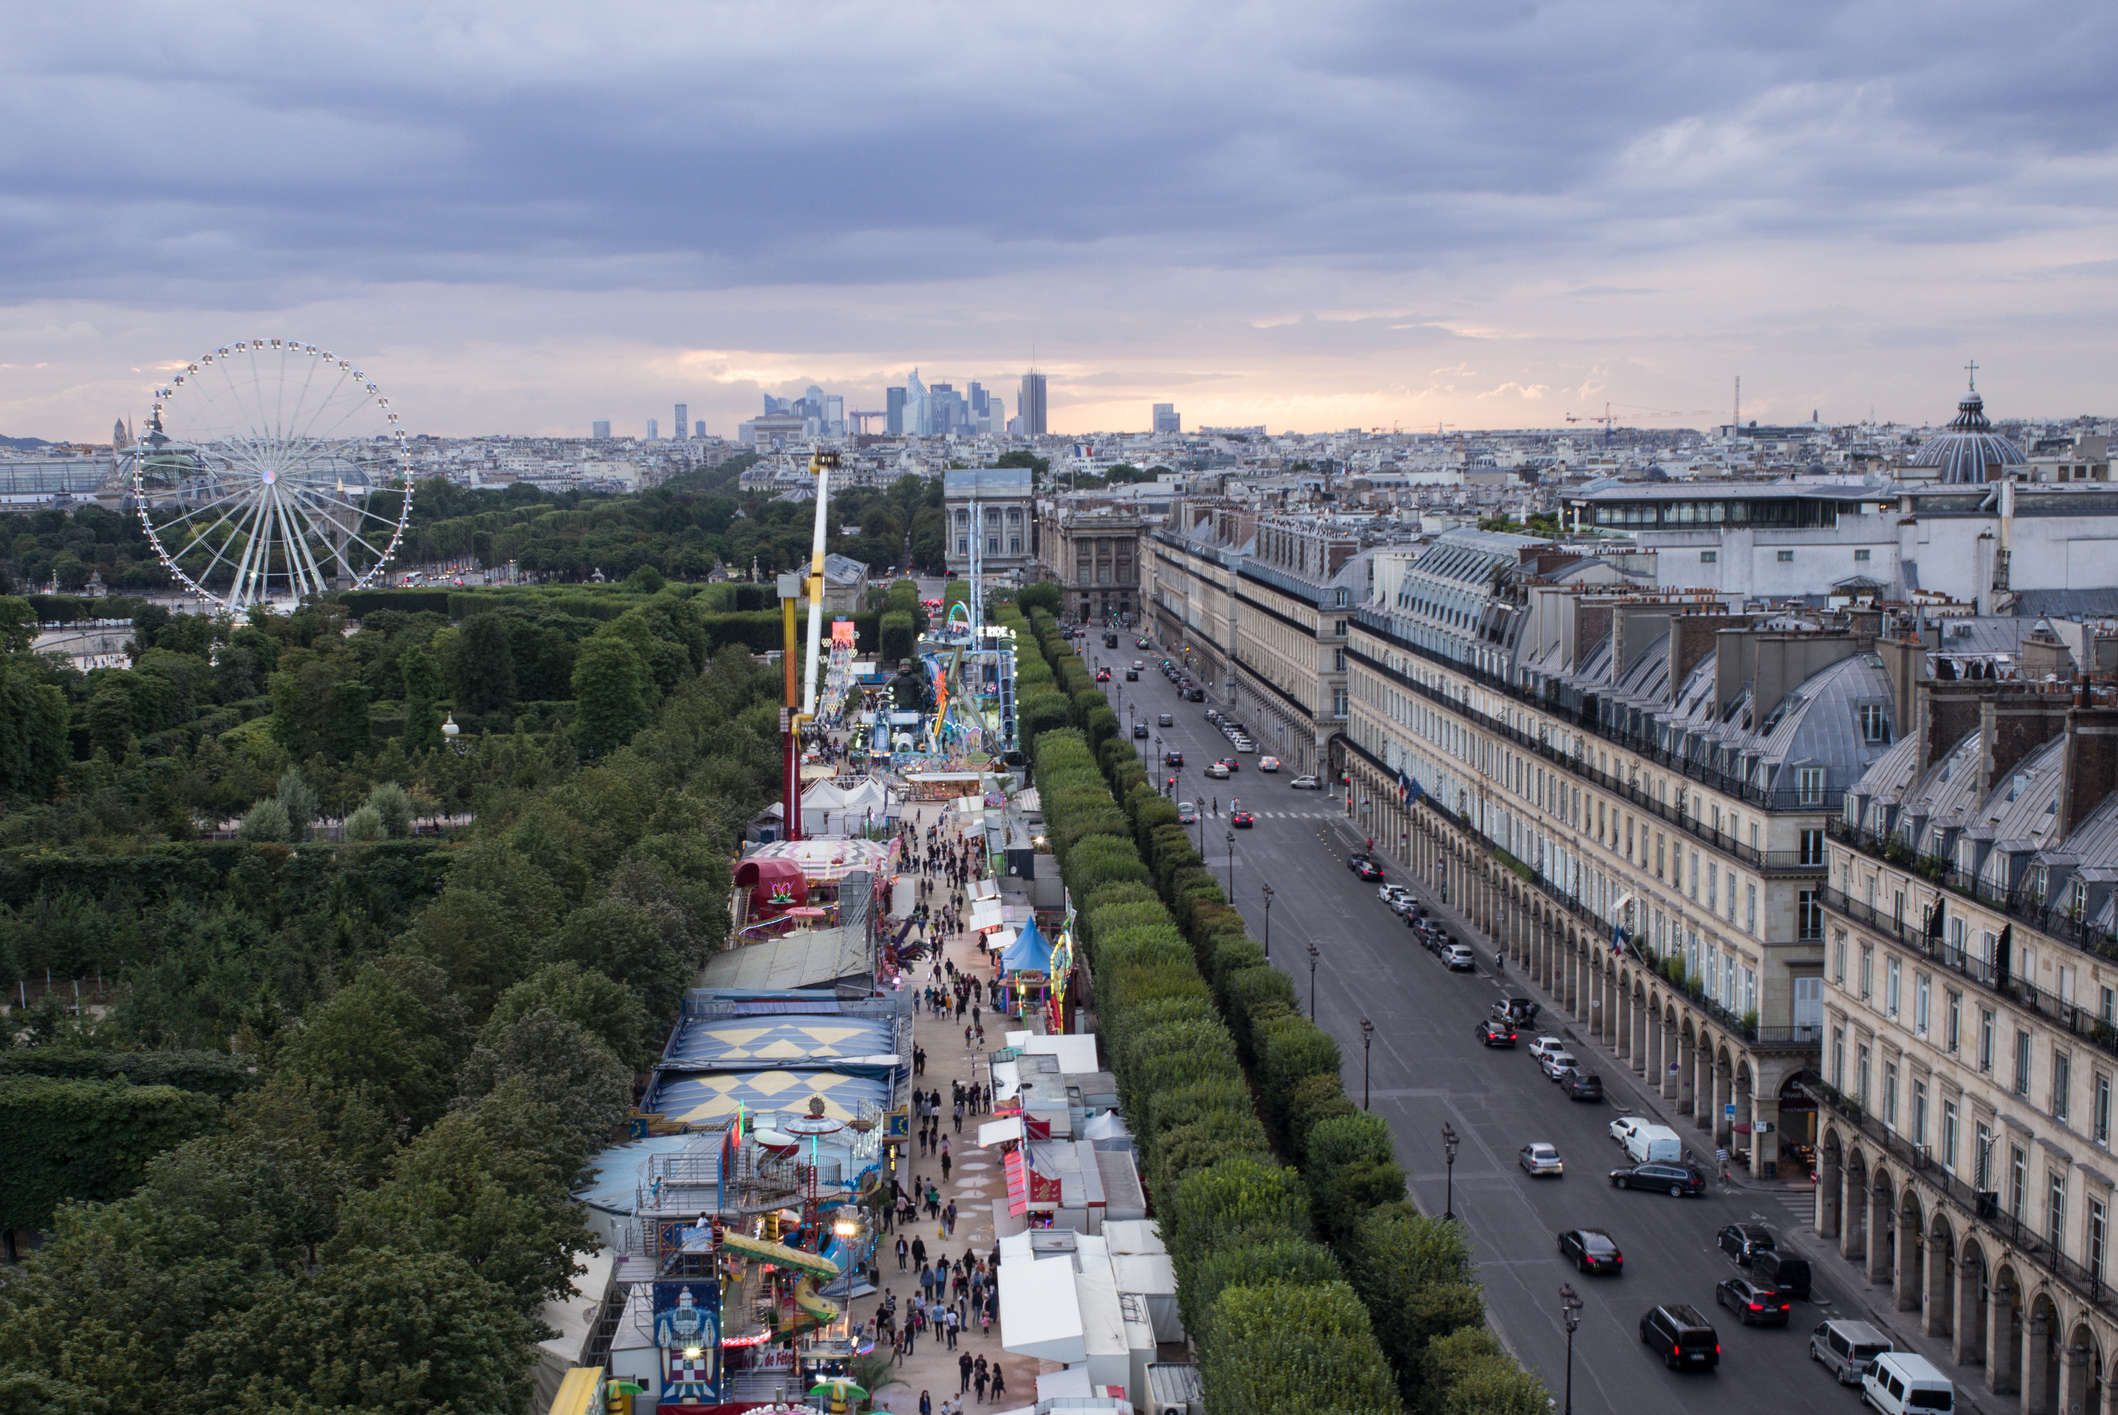 Paris plans to transform into an anti-congestion, anti-pollution city after lockdown